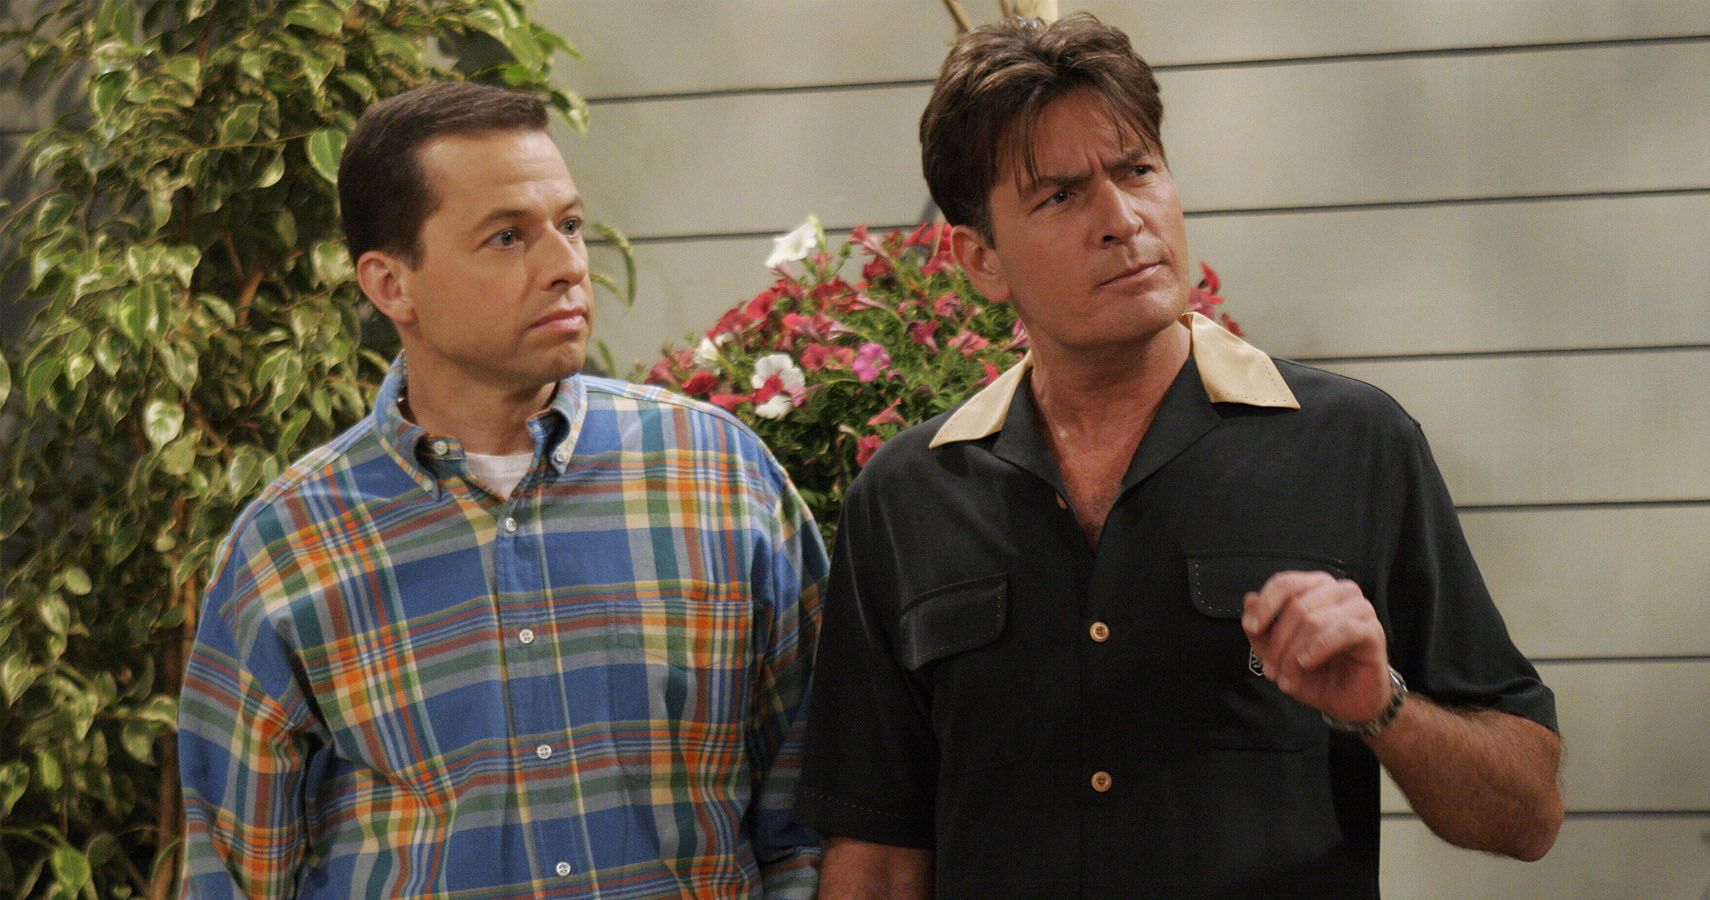 How much did Charlie Harper make?